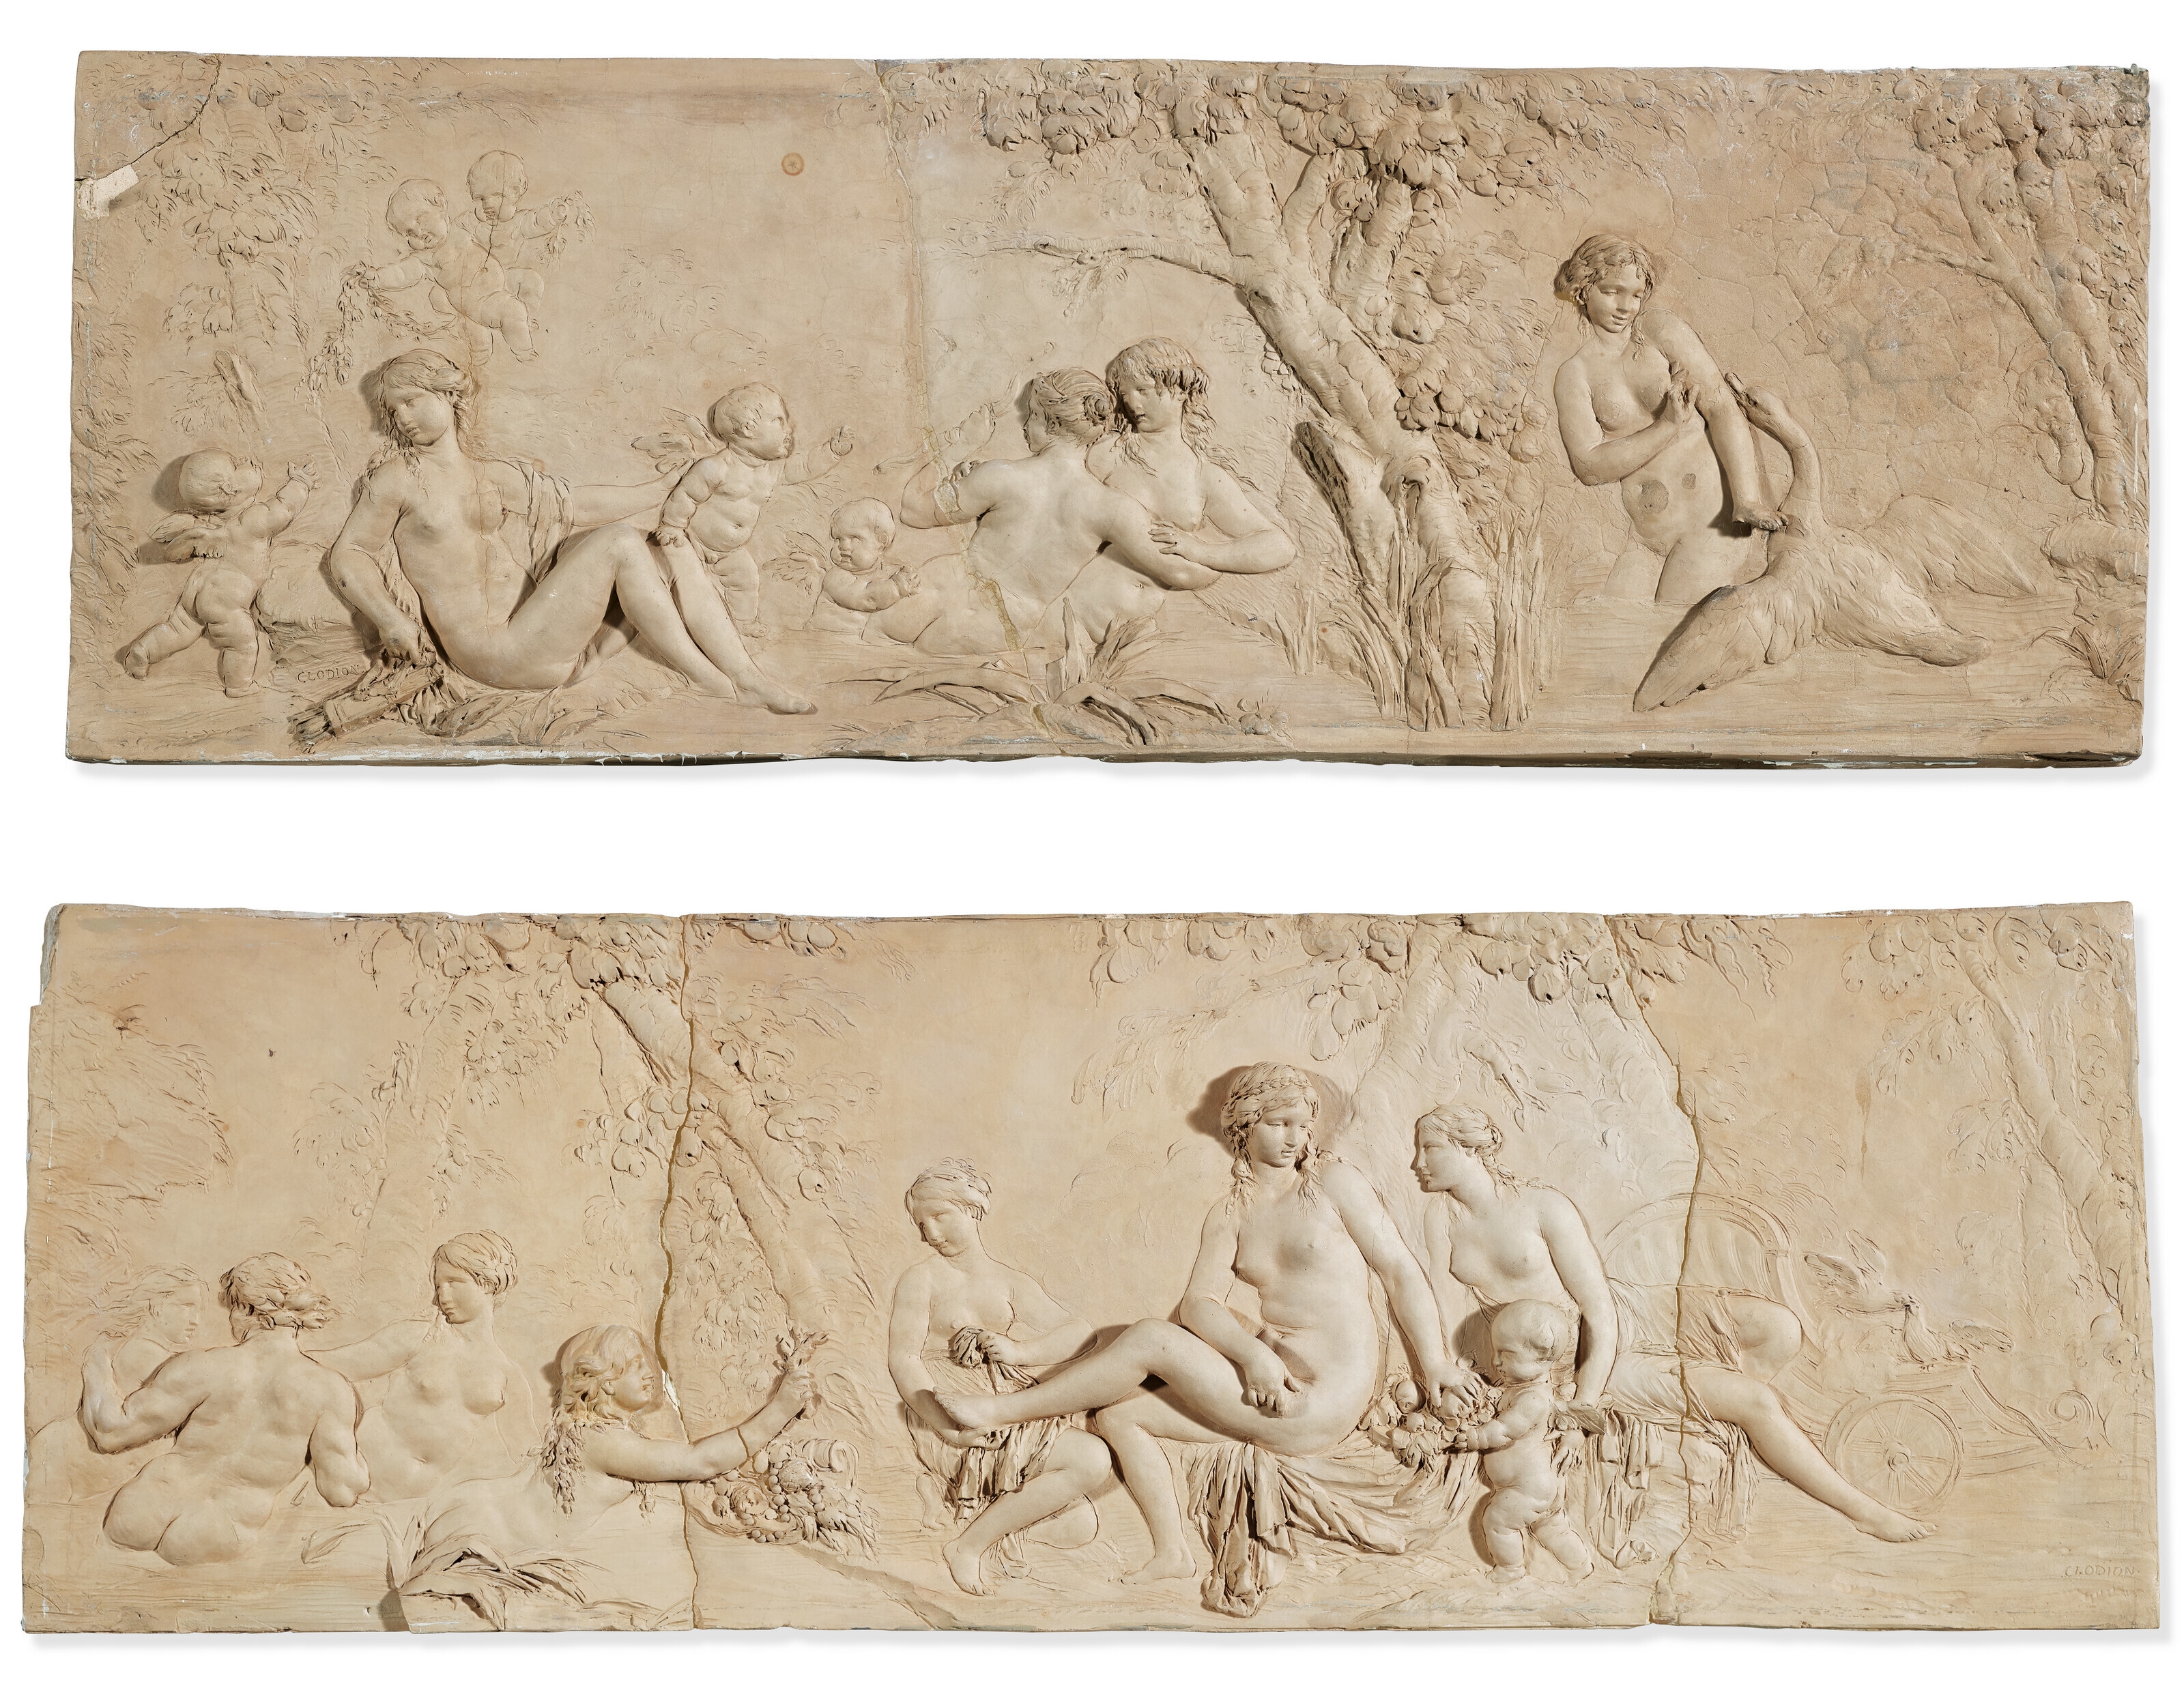 A PAIR OF RECTANGULAR TERRACOTTA PREPARATORY RELIEFS FOR THE SALLE DE BAINS OF THE HÔTEL DE BESENVAL: ONE DEPICTING CUPID AND VENUS, SALMACIS AND HERMAPHRODITE AND LEDA AND THE SWAN AND THE OTHER DEPICTING THE BATH OF VENUS by Claude Michel Clodion, CIRCA 1780-1782